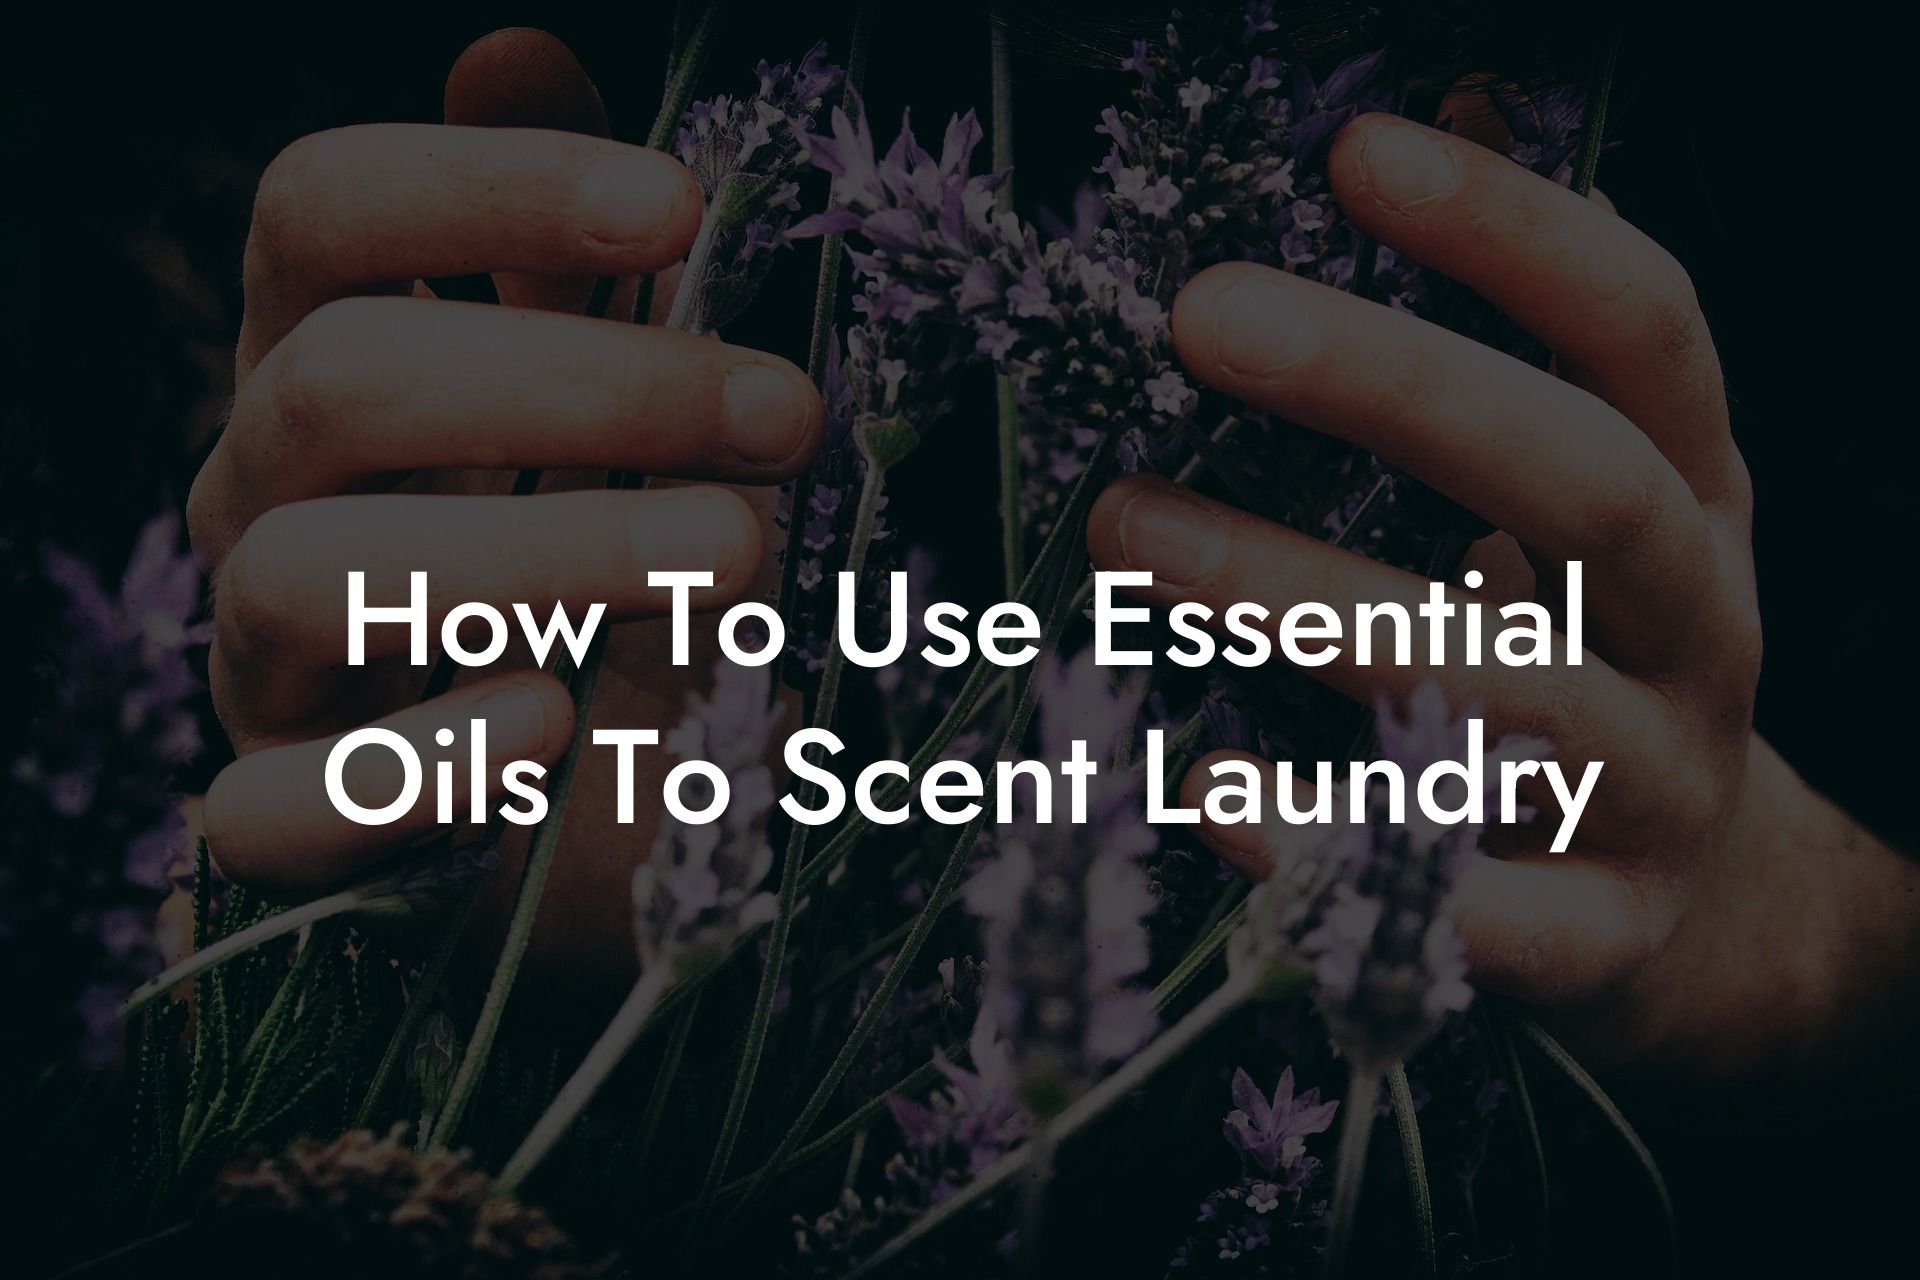 How To Use Essential Oils To Scent Laundry